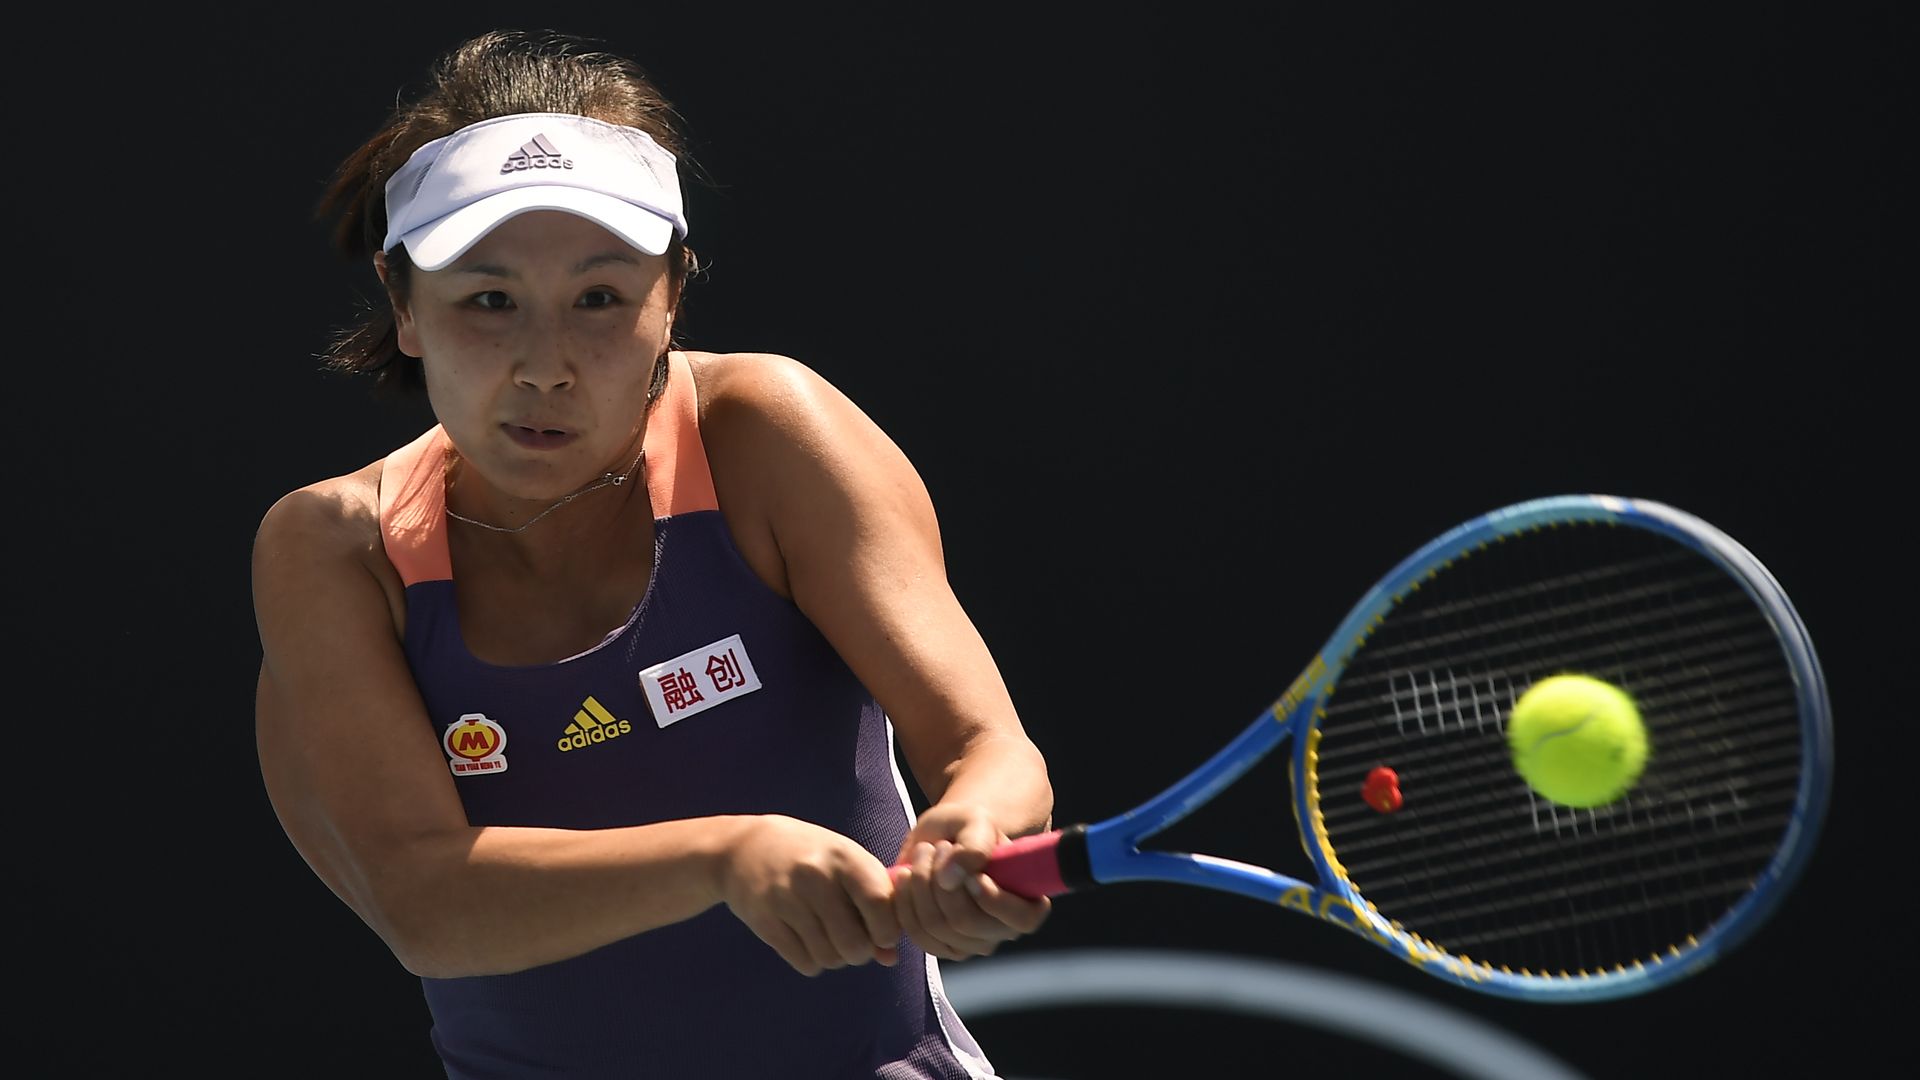  Shuai Peng of China during her Women's Singles first round match at the 2020 Australian Open at Melbourne Park on January 21, 2020 in Melbourne, Australia.